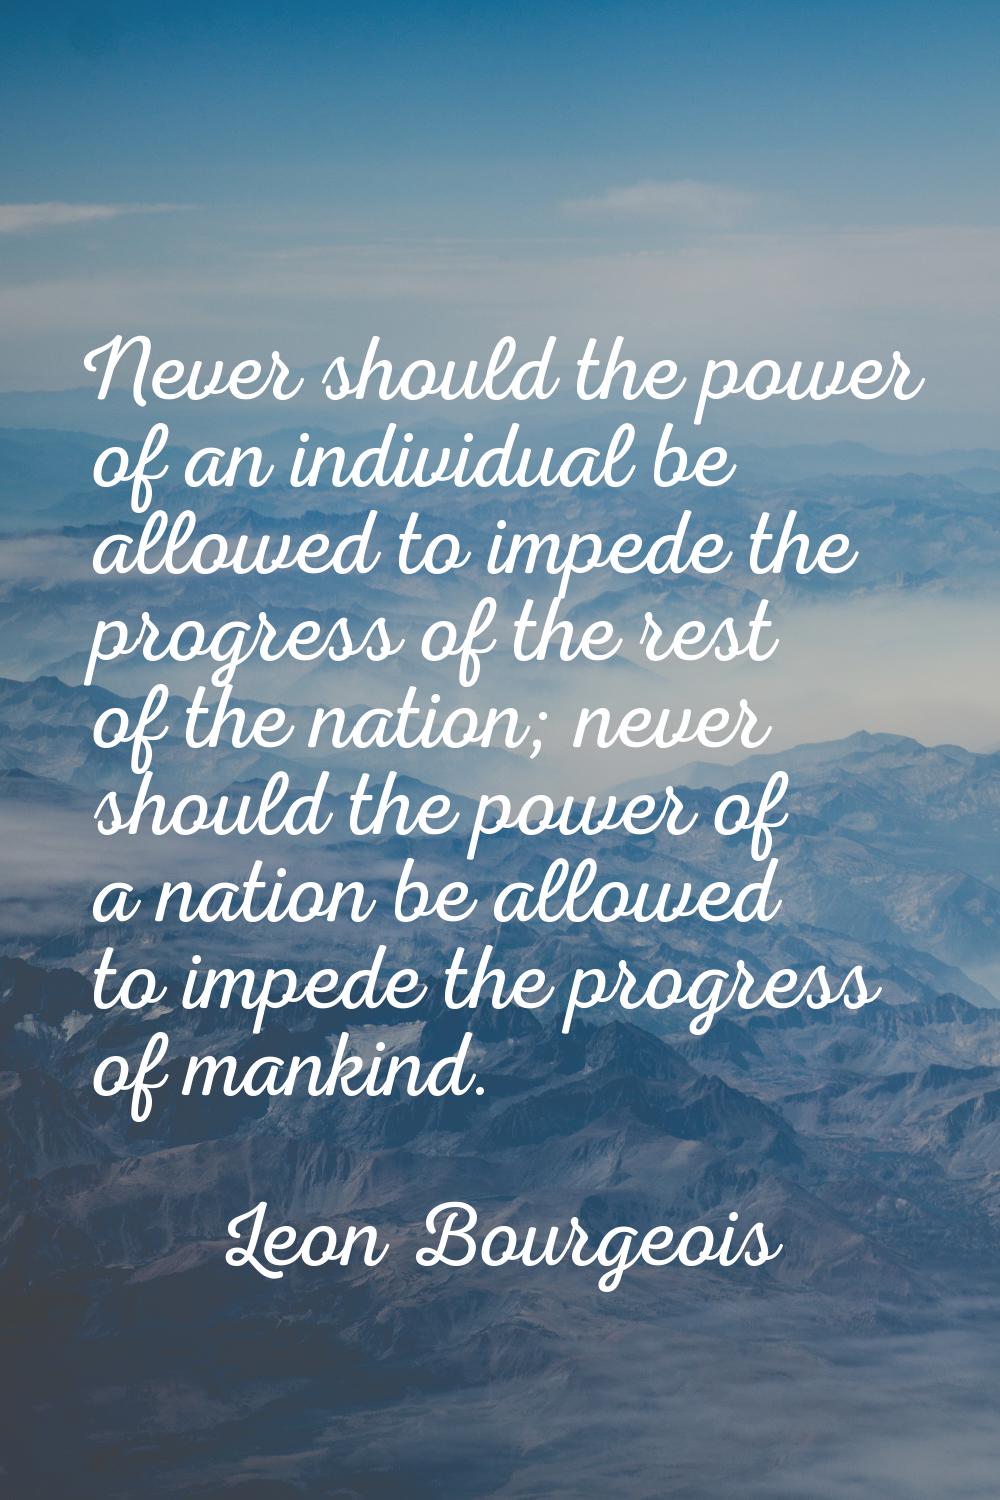 Never should the power of an individual be allowed to impede the progress of the rest of the nation